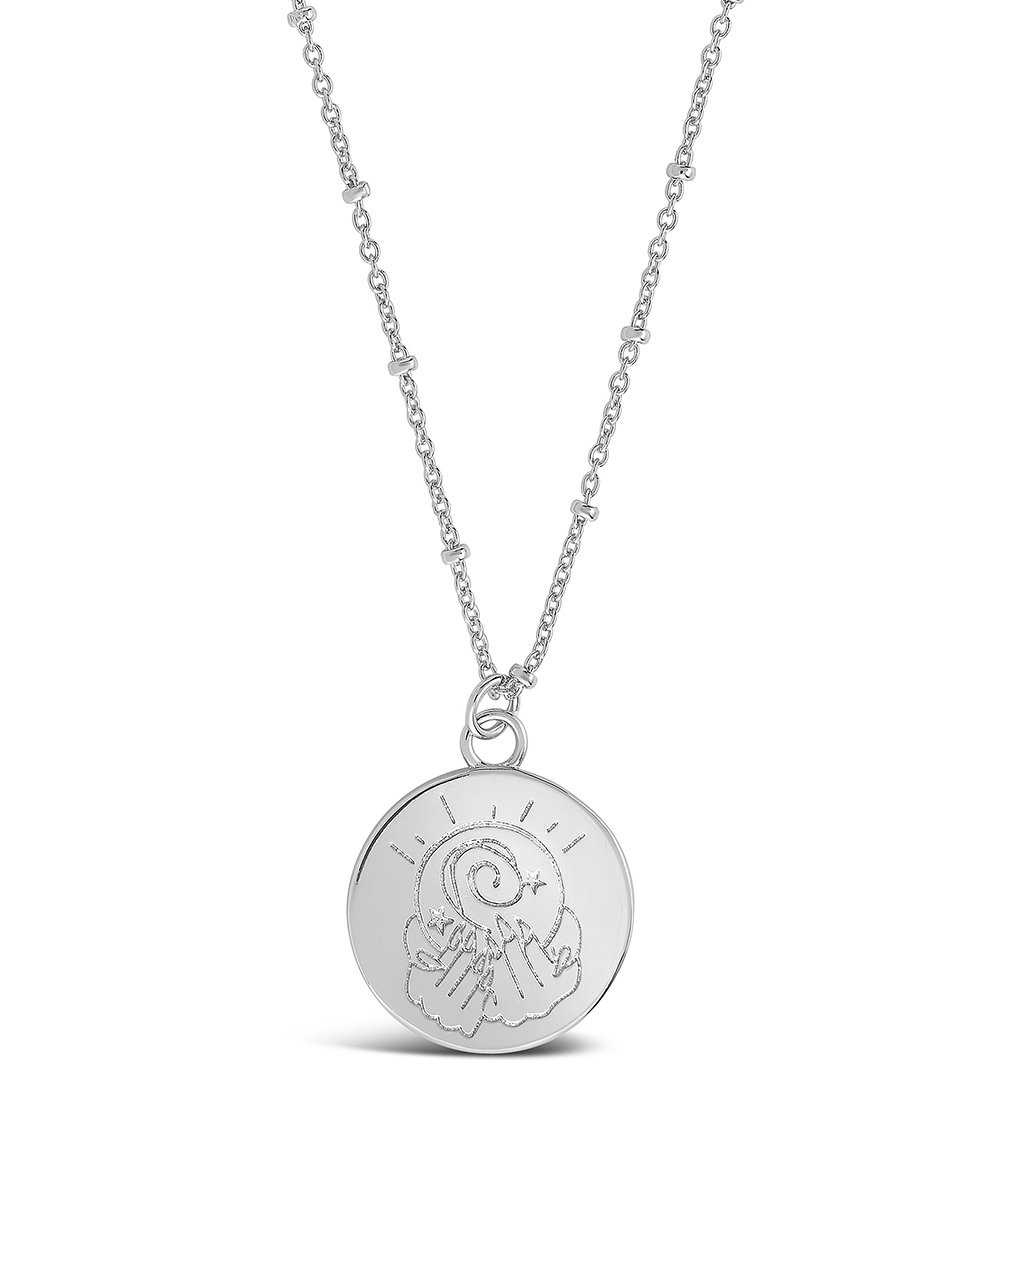 Psychic Sphere Necklace - Sterling Forever